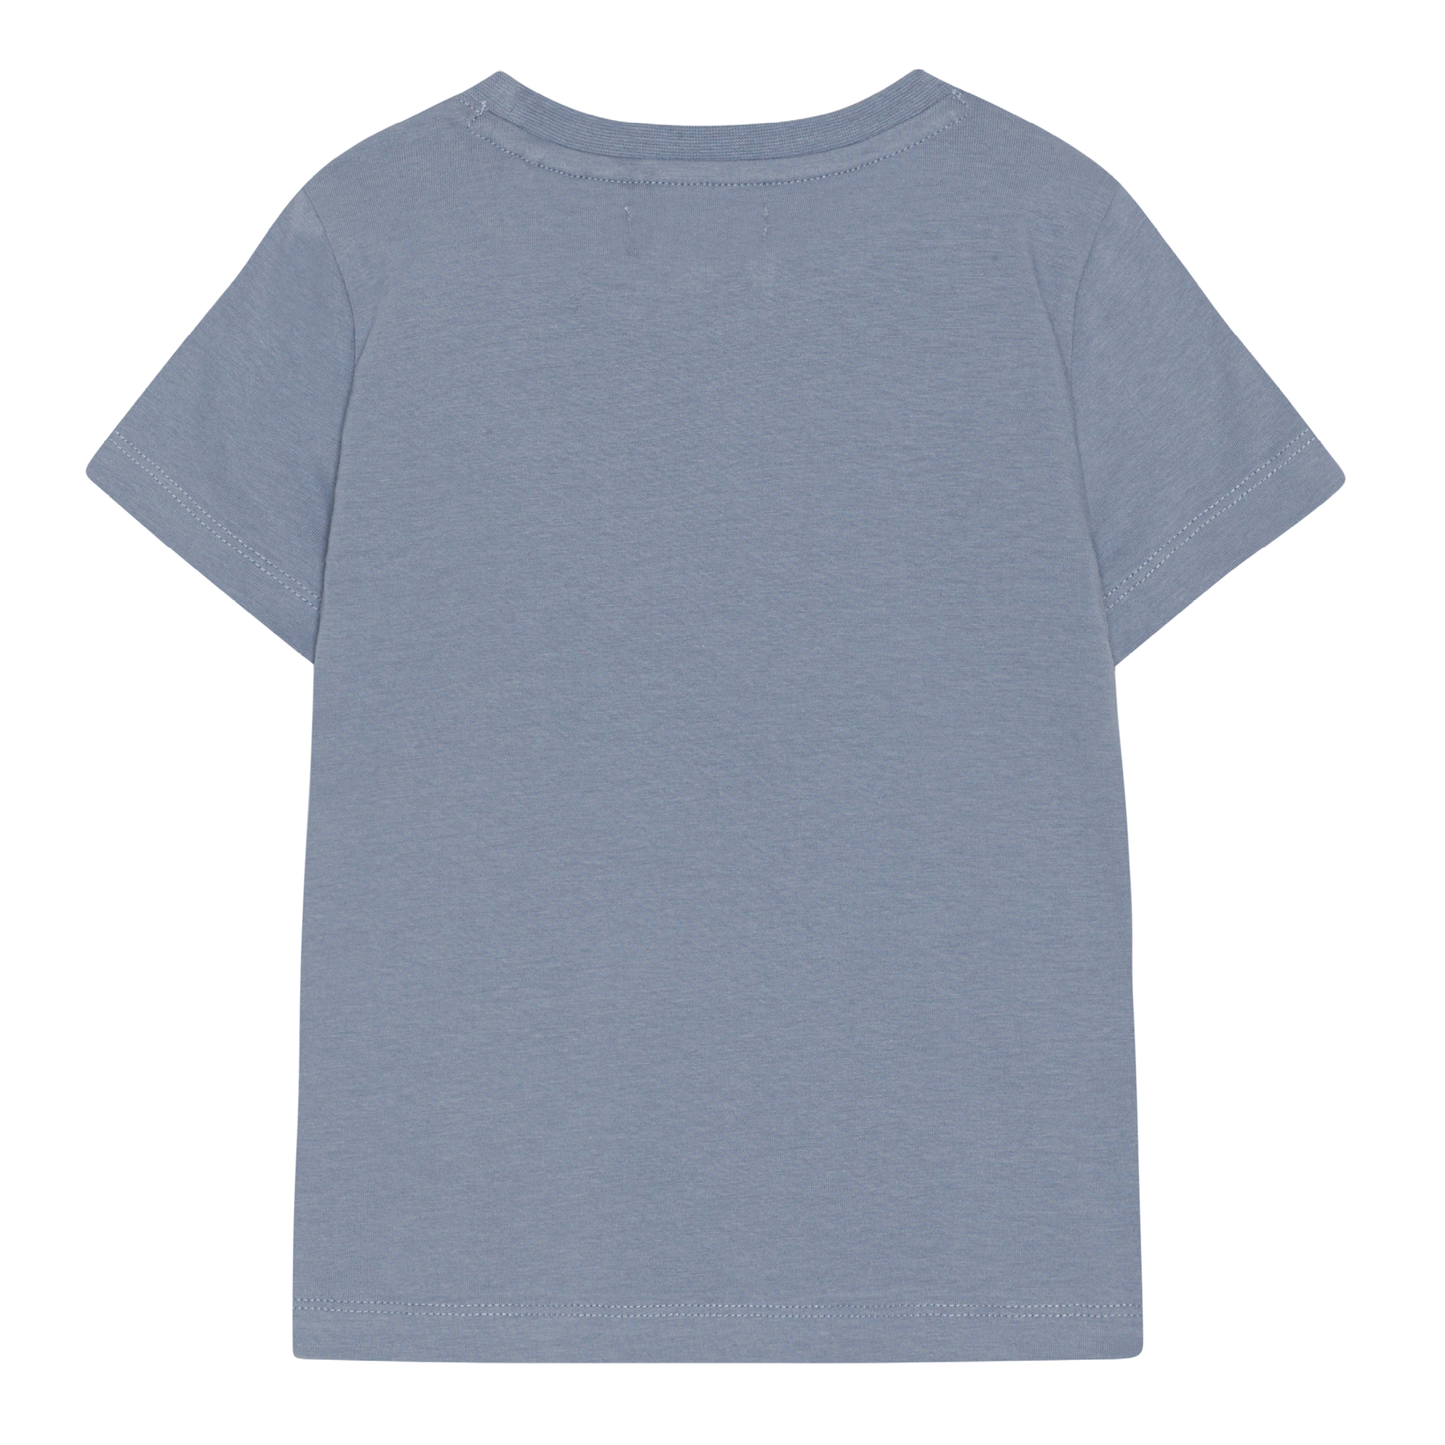 Andy T-Shirt, Dusty Blue